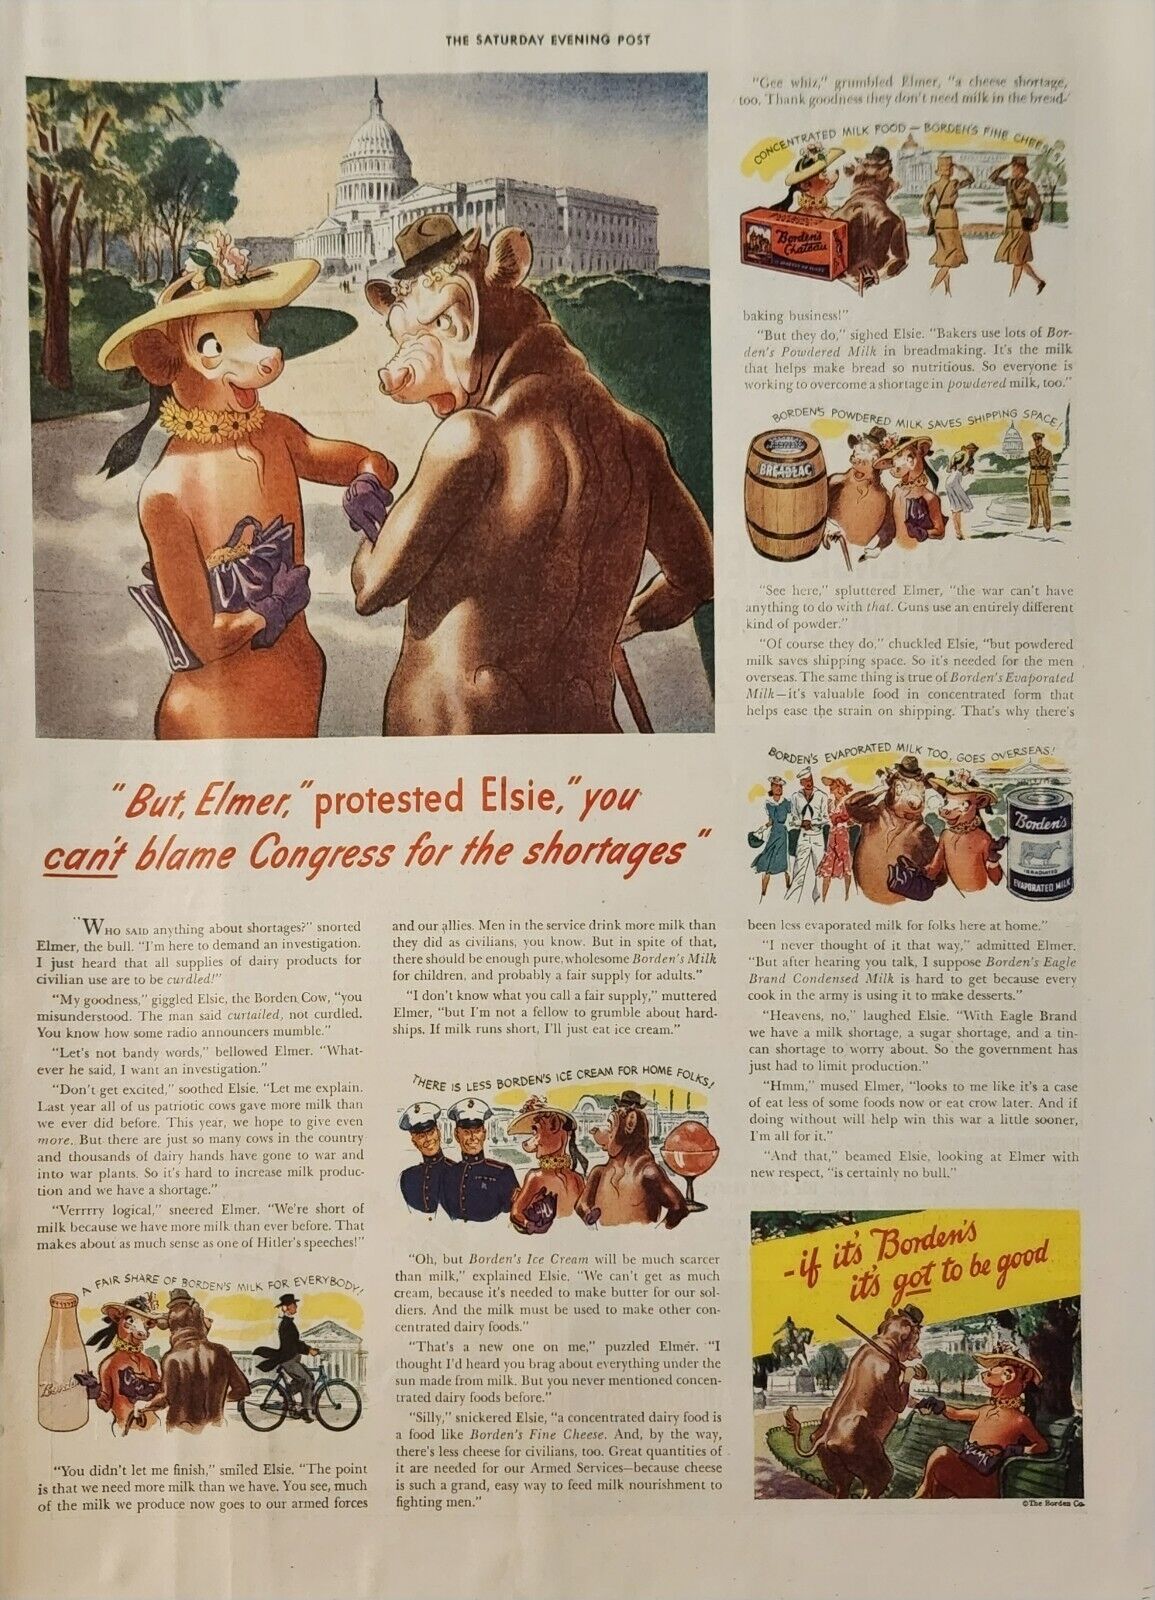 1943 Bordens Vintage Ad But Elmer protested Elsie you cant blame congress